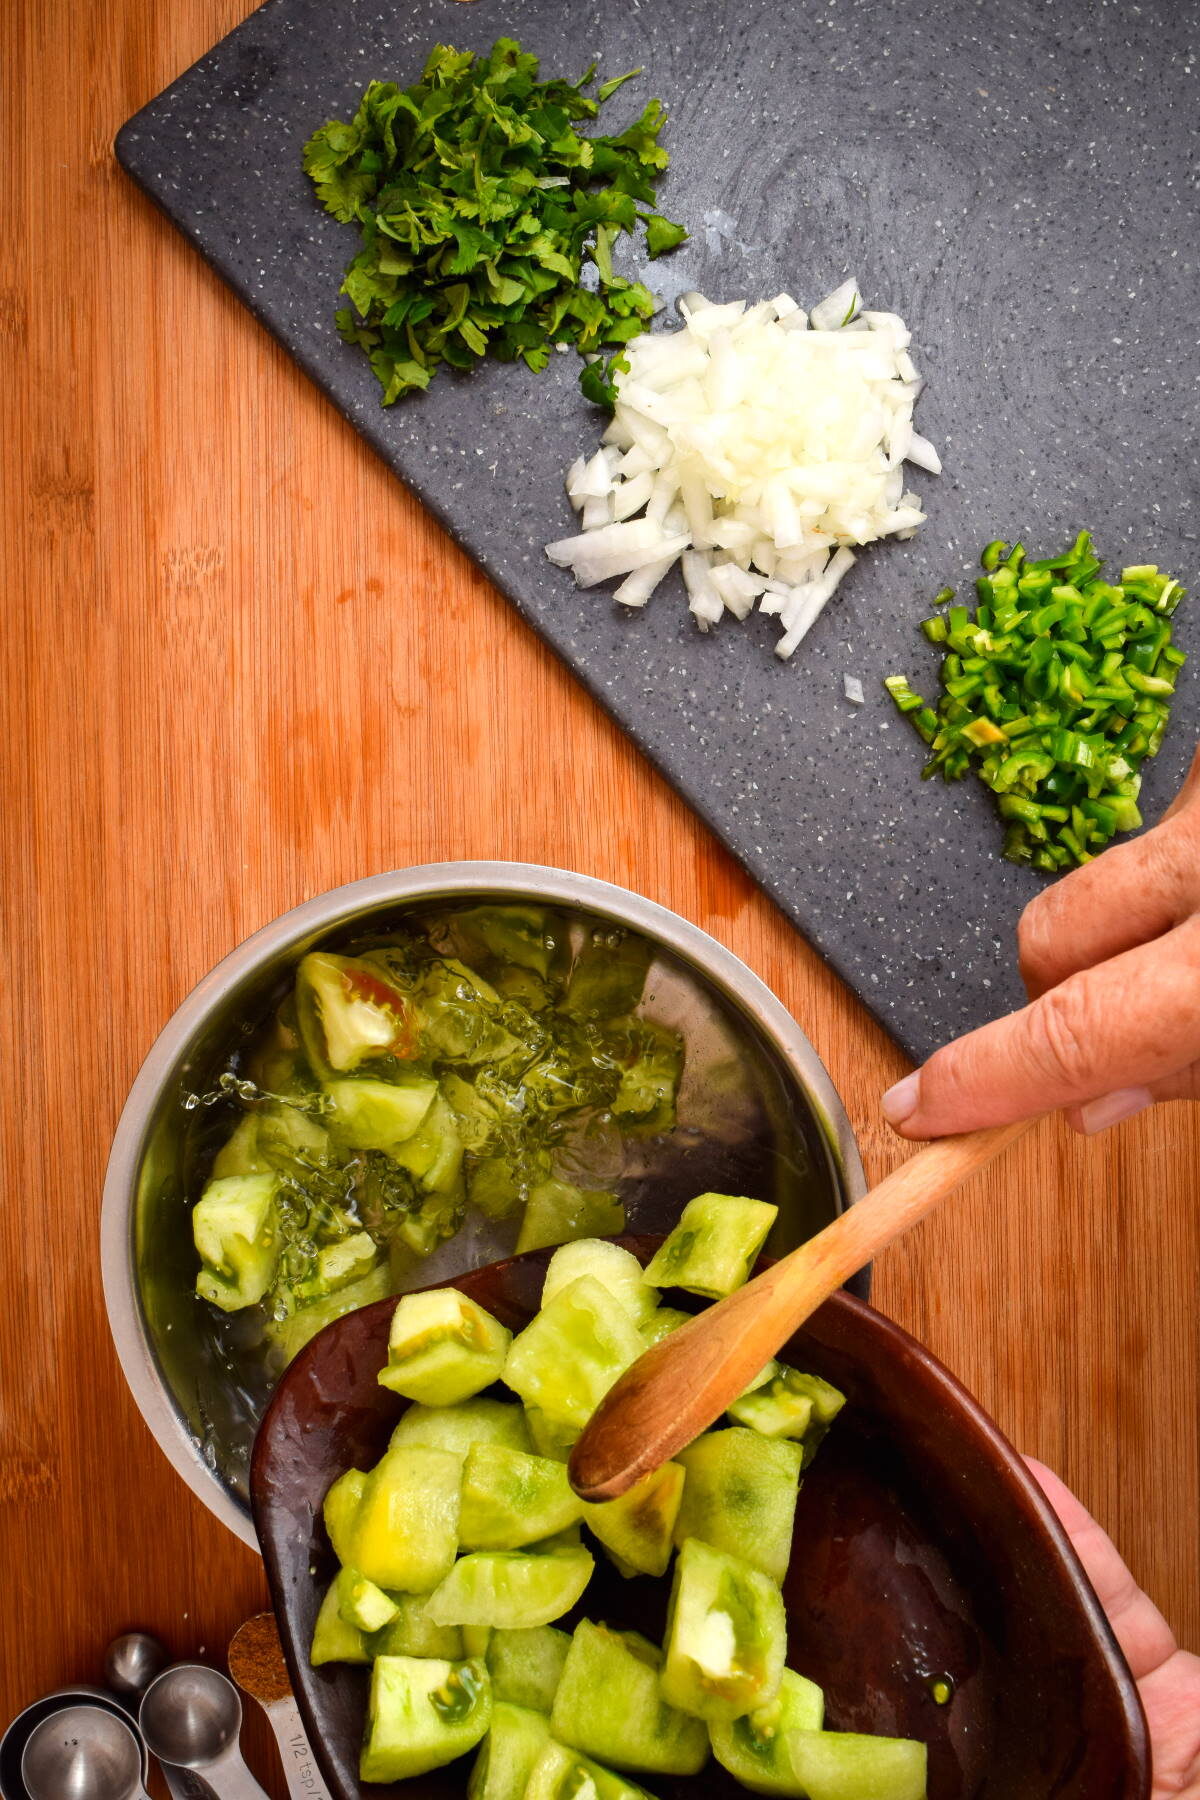 Pot of cooked tomatillo salsa ingredients and a wooden spoon. A cutting board with diced onion, green pepper and cilantro on the side.